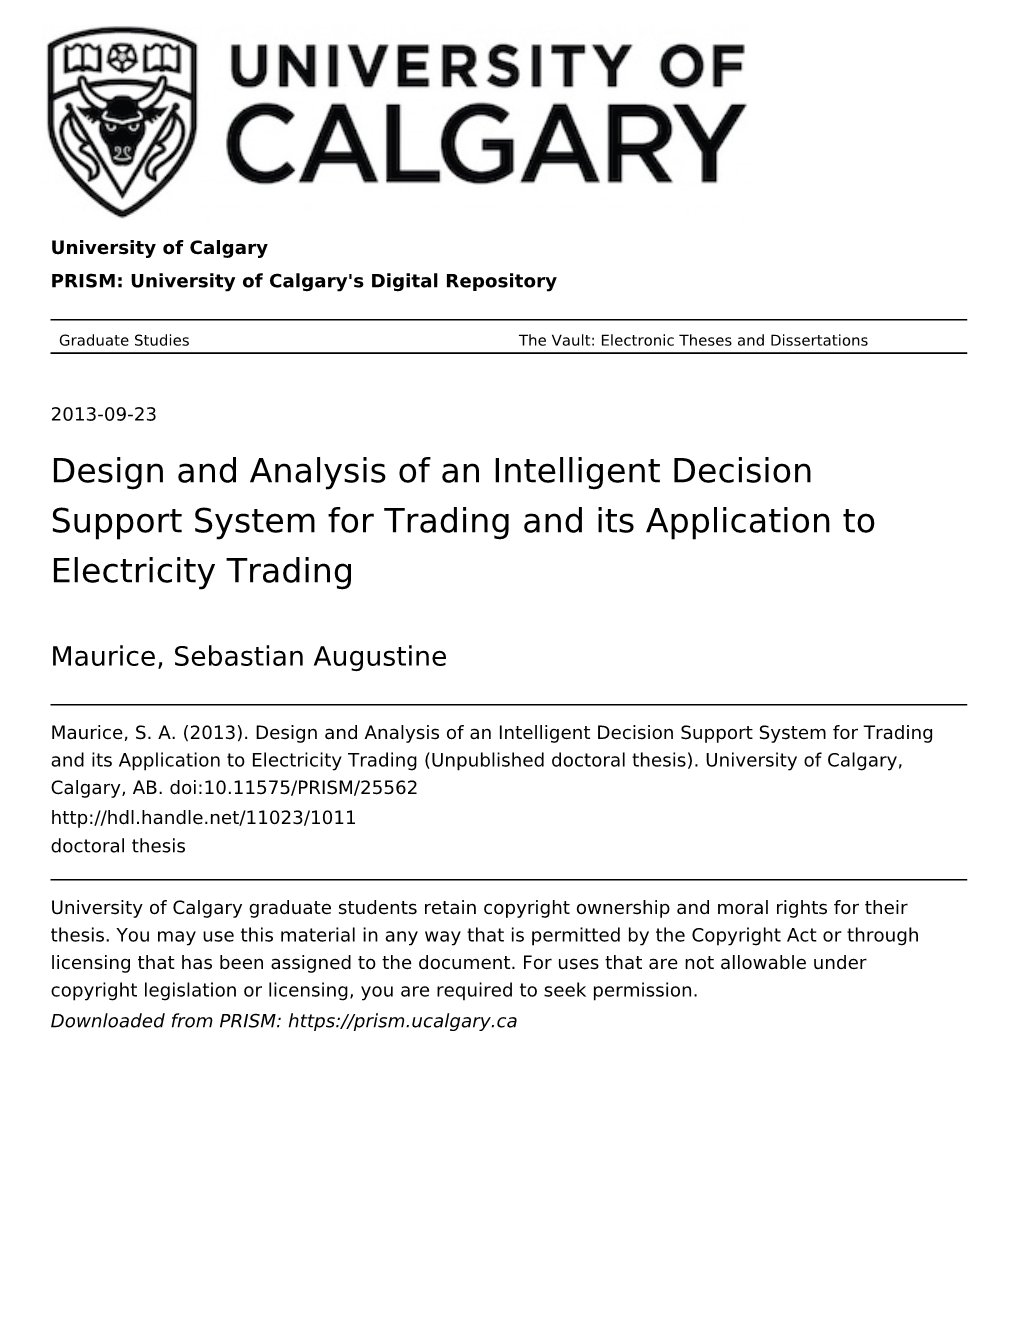 Design and Analysis of an Intelligent Decision Support System for Trading and Its Application to Electricity Trading